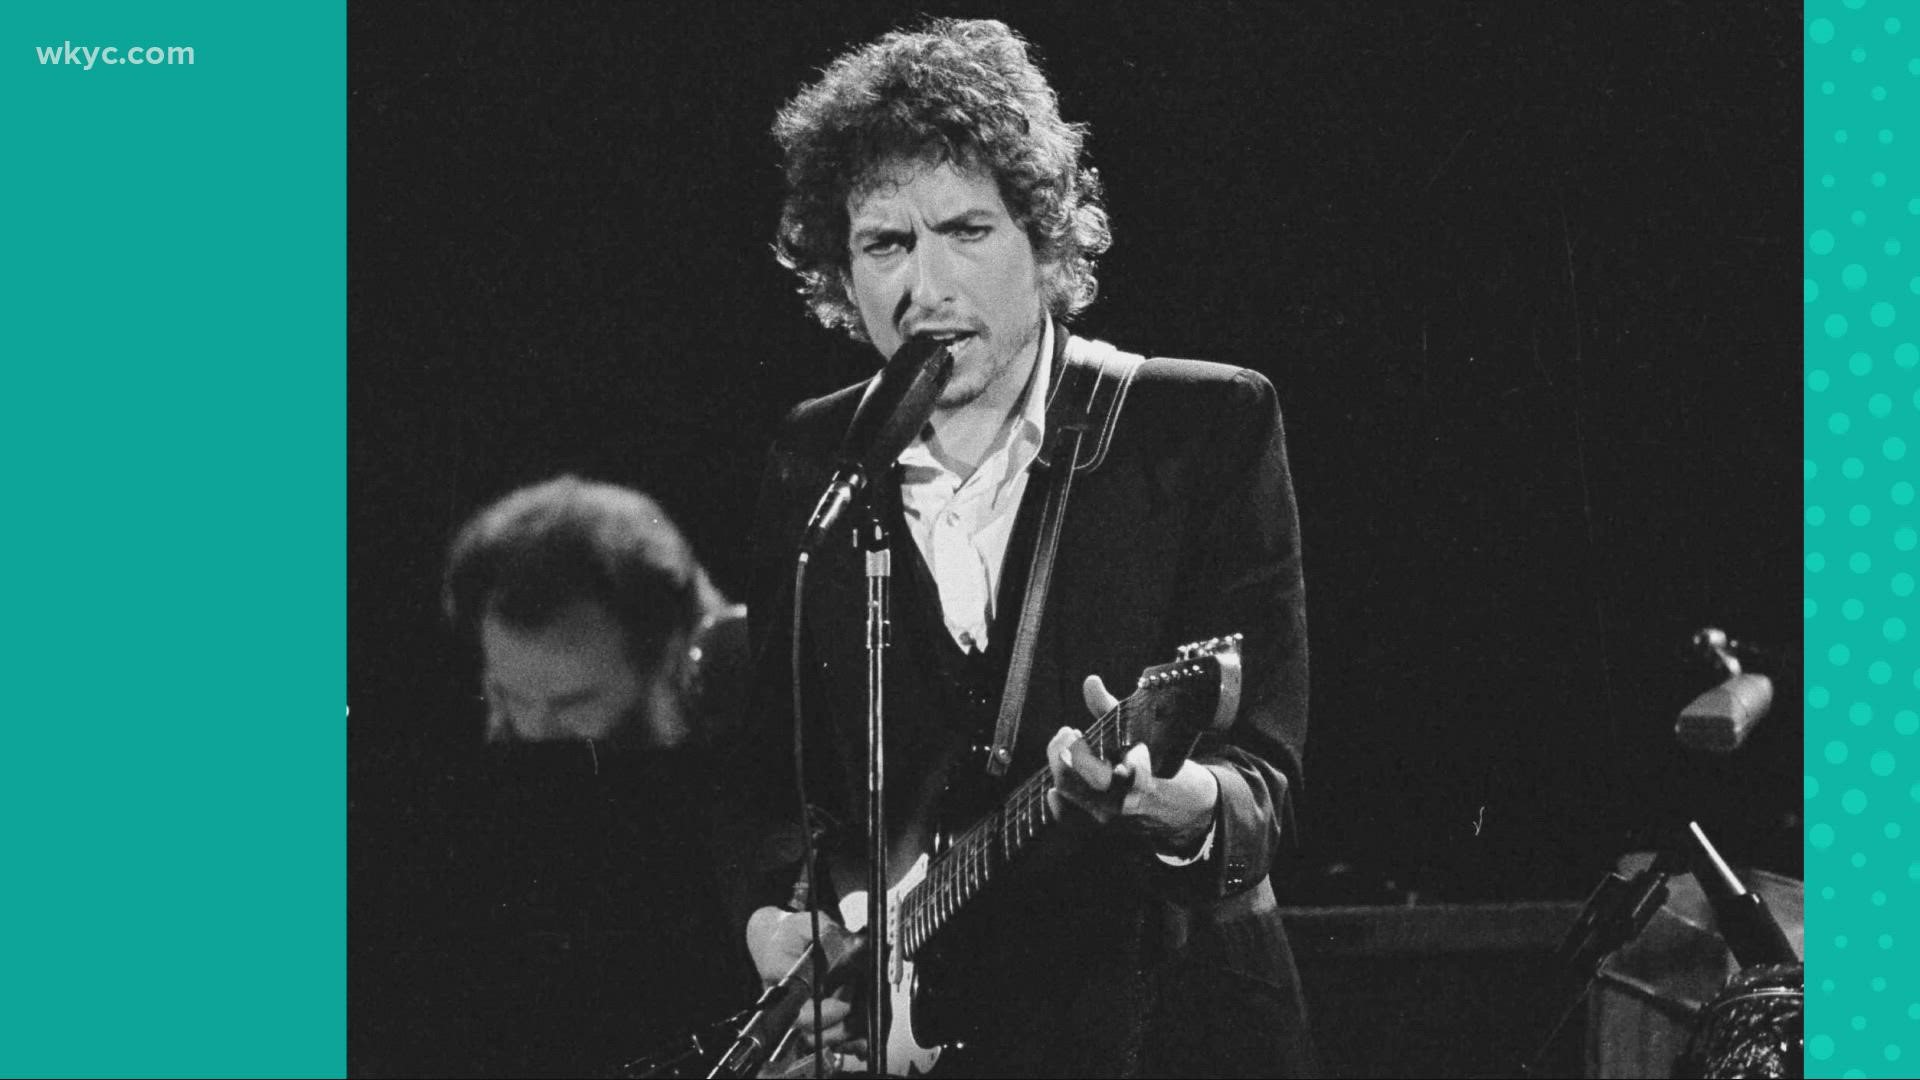 Bob Dylan is the latest celebrity to sell his catalog.